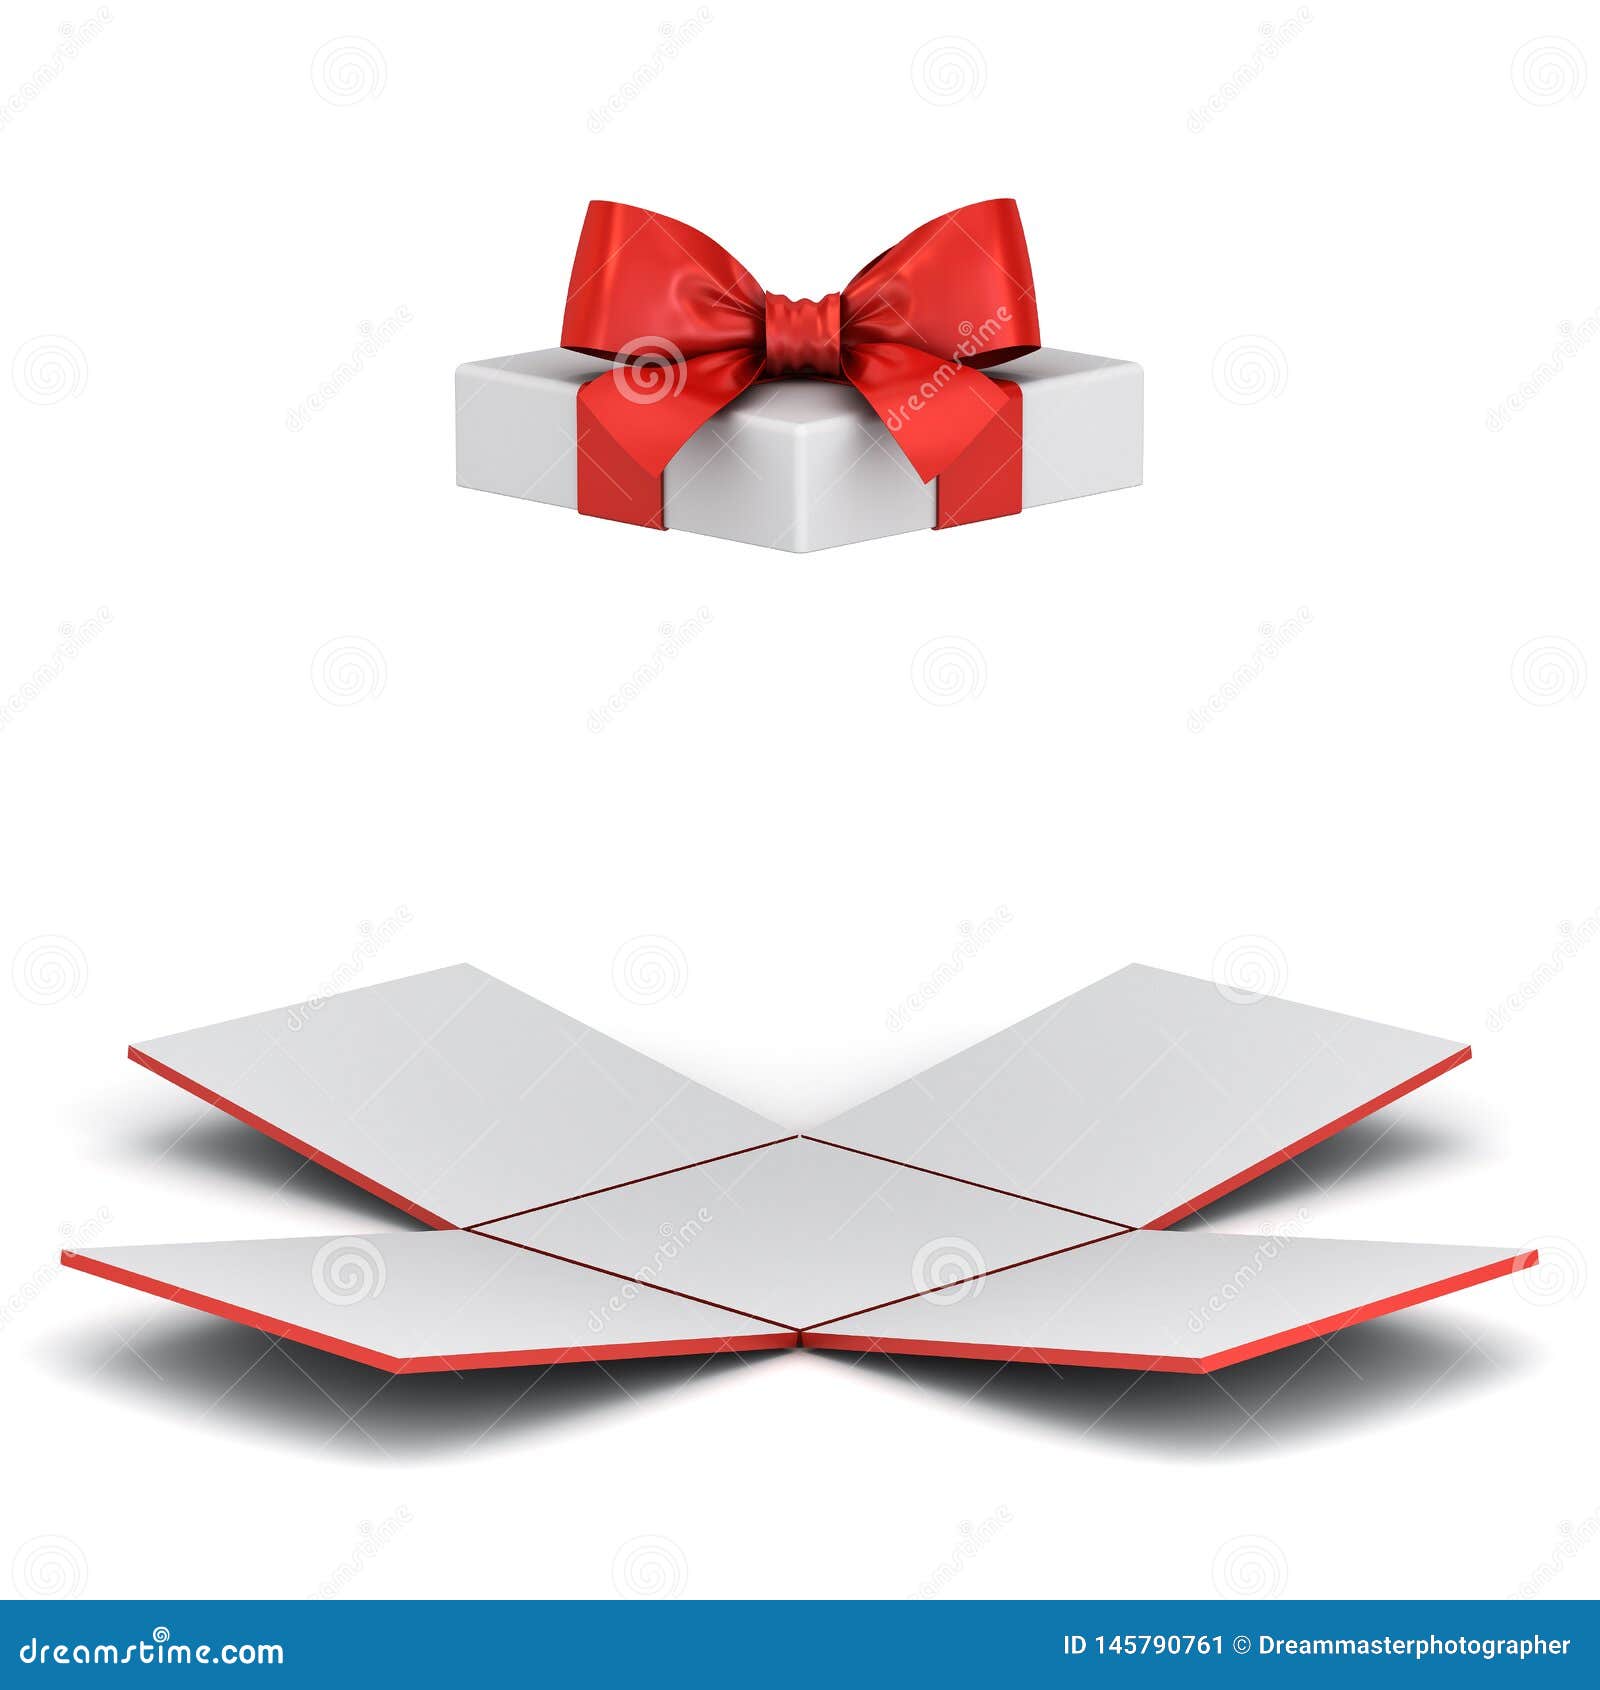 open gift box or unfold present box with red ribbon bow  on white background